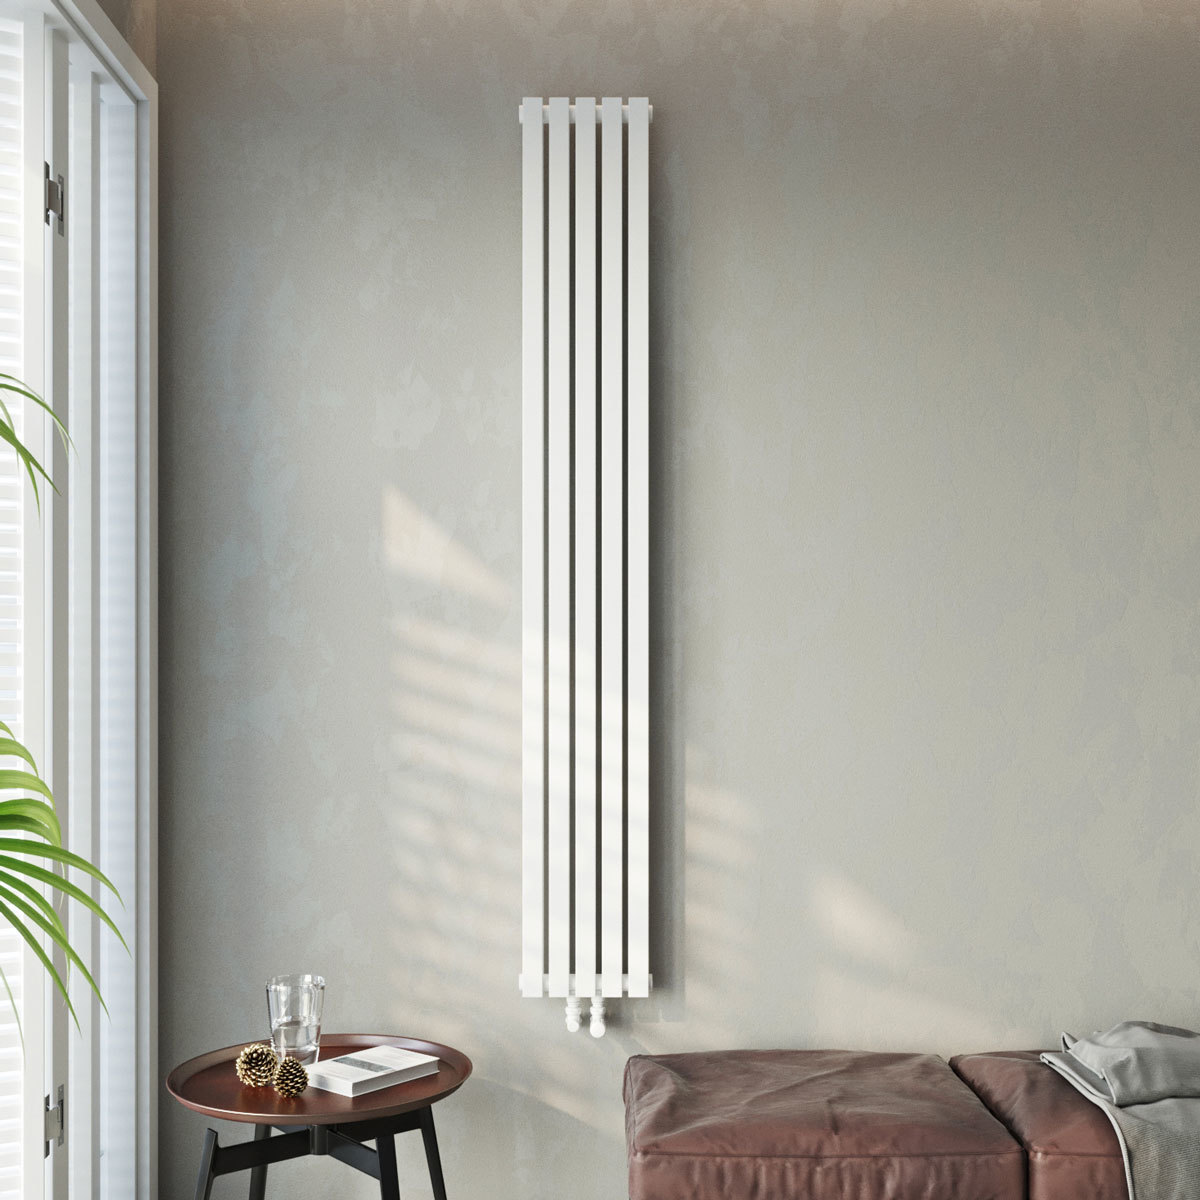 Lifrestyle image of Linear radiator in living room setting